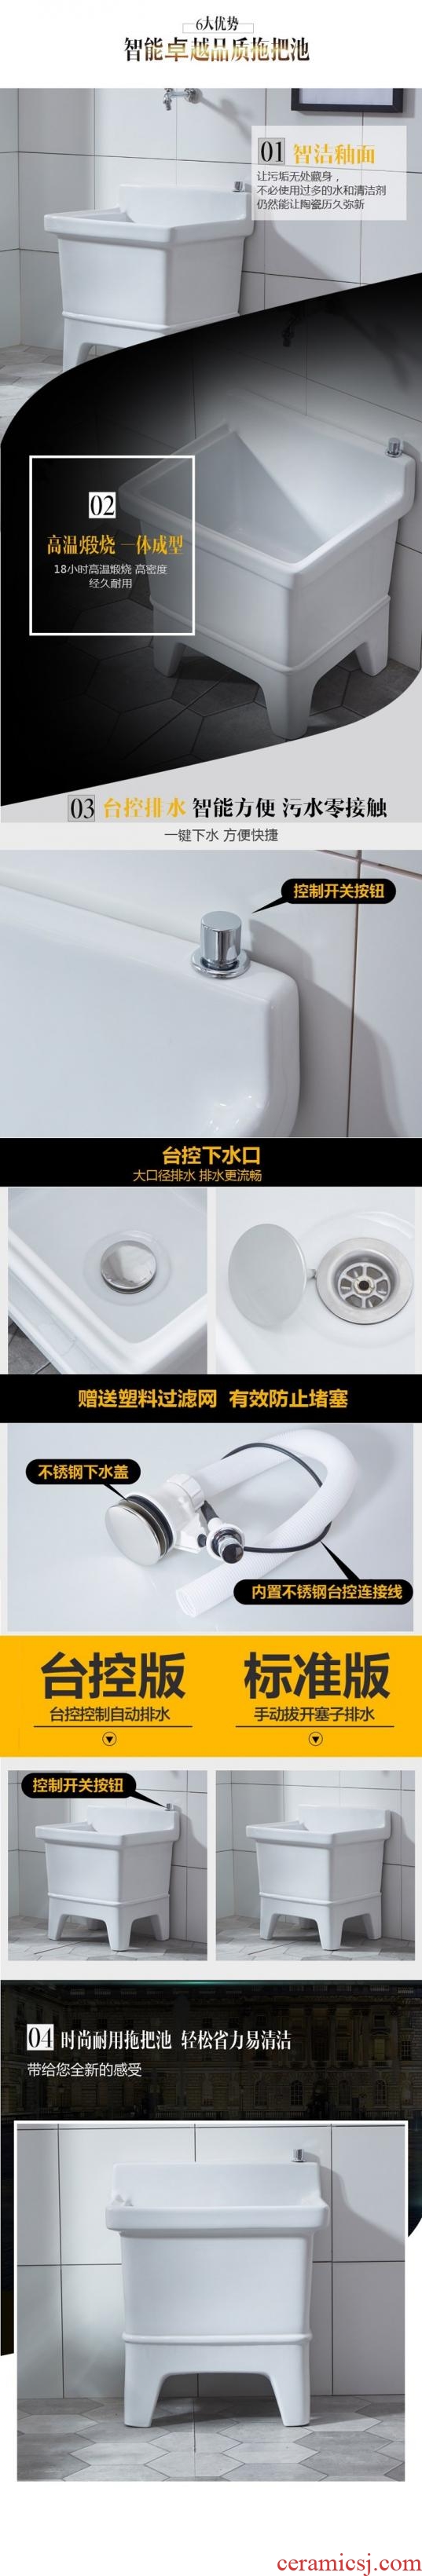 The ground cleaning mop pool. Ceramic slot trumpet large pools of household mop floor balcony toilet 35